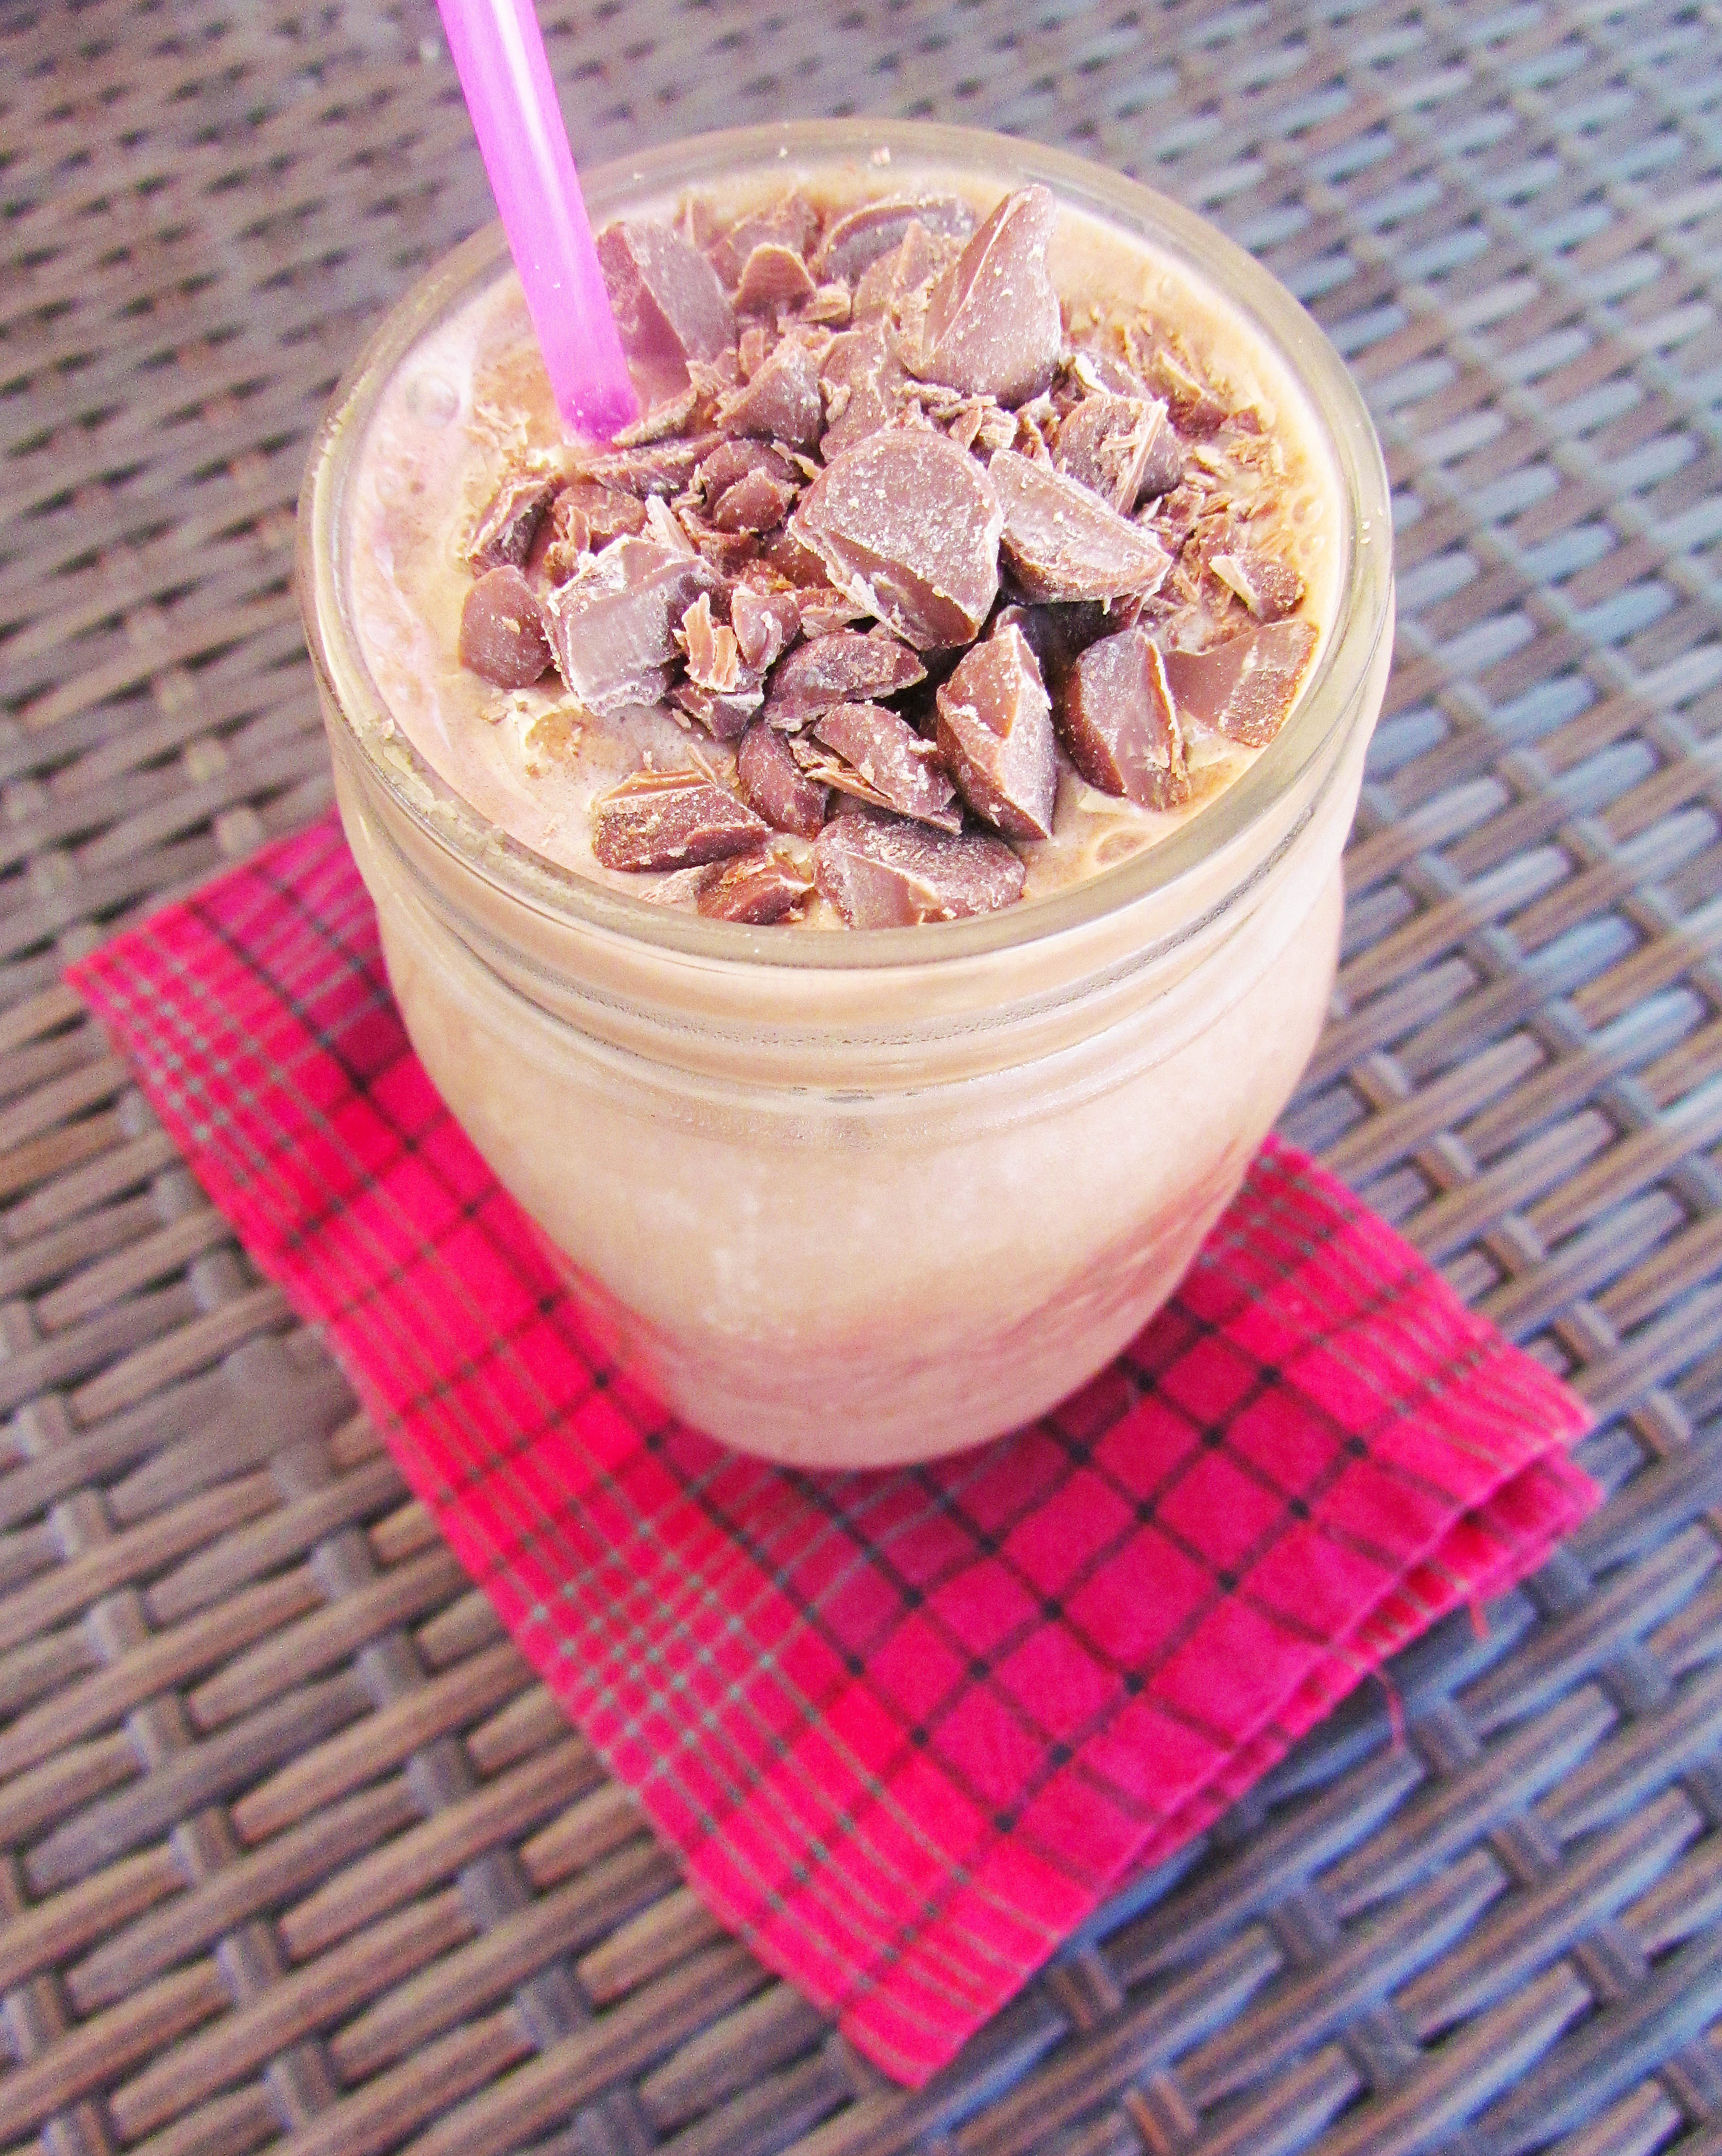 My Favorite Low Calorie Post-Workout Fuel: Chocolate Peanut Butter Protein Smoothie